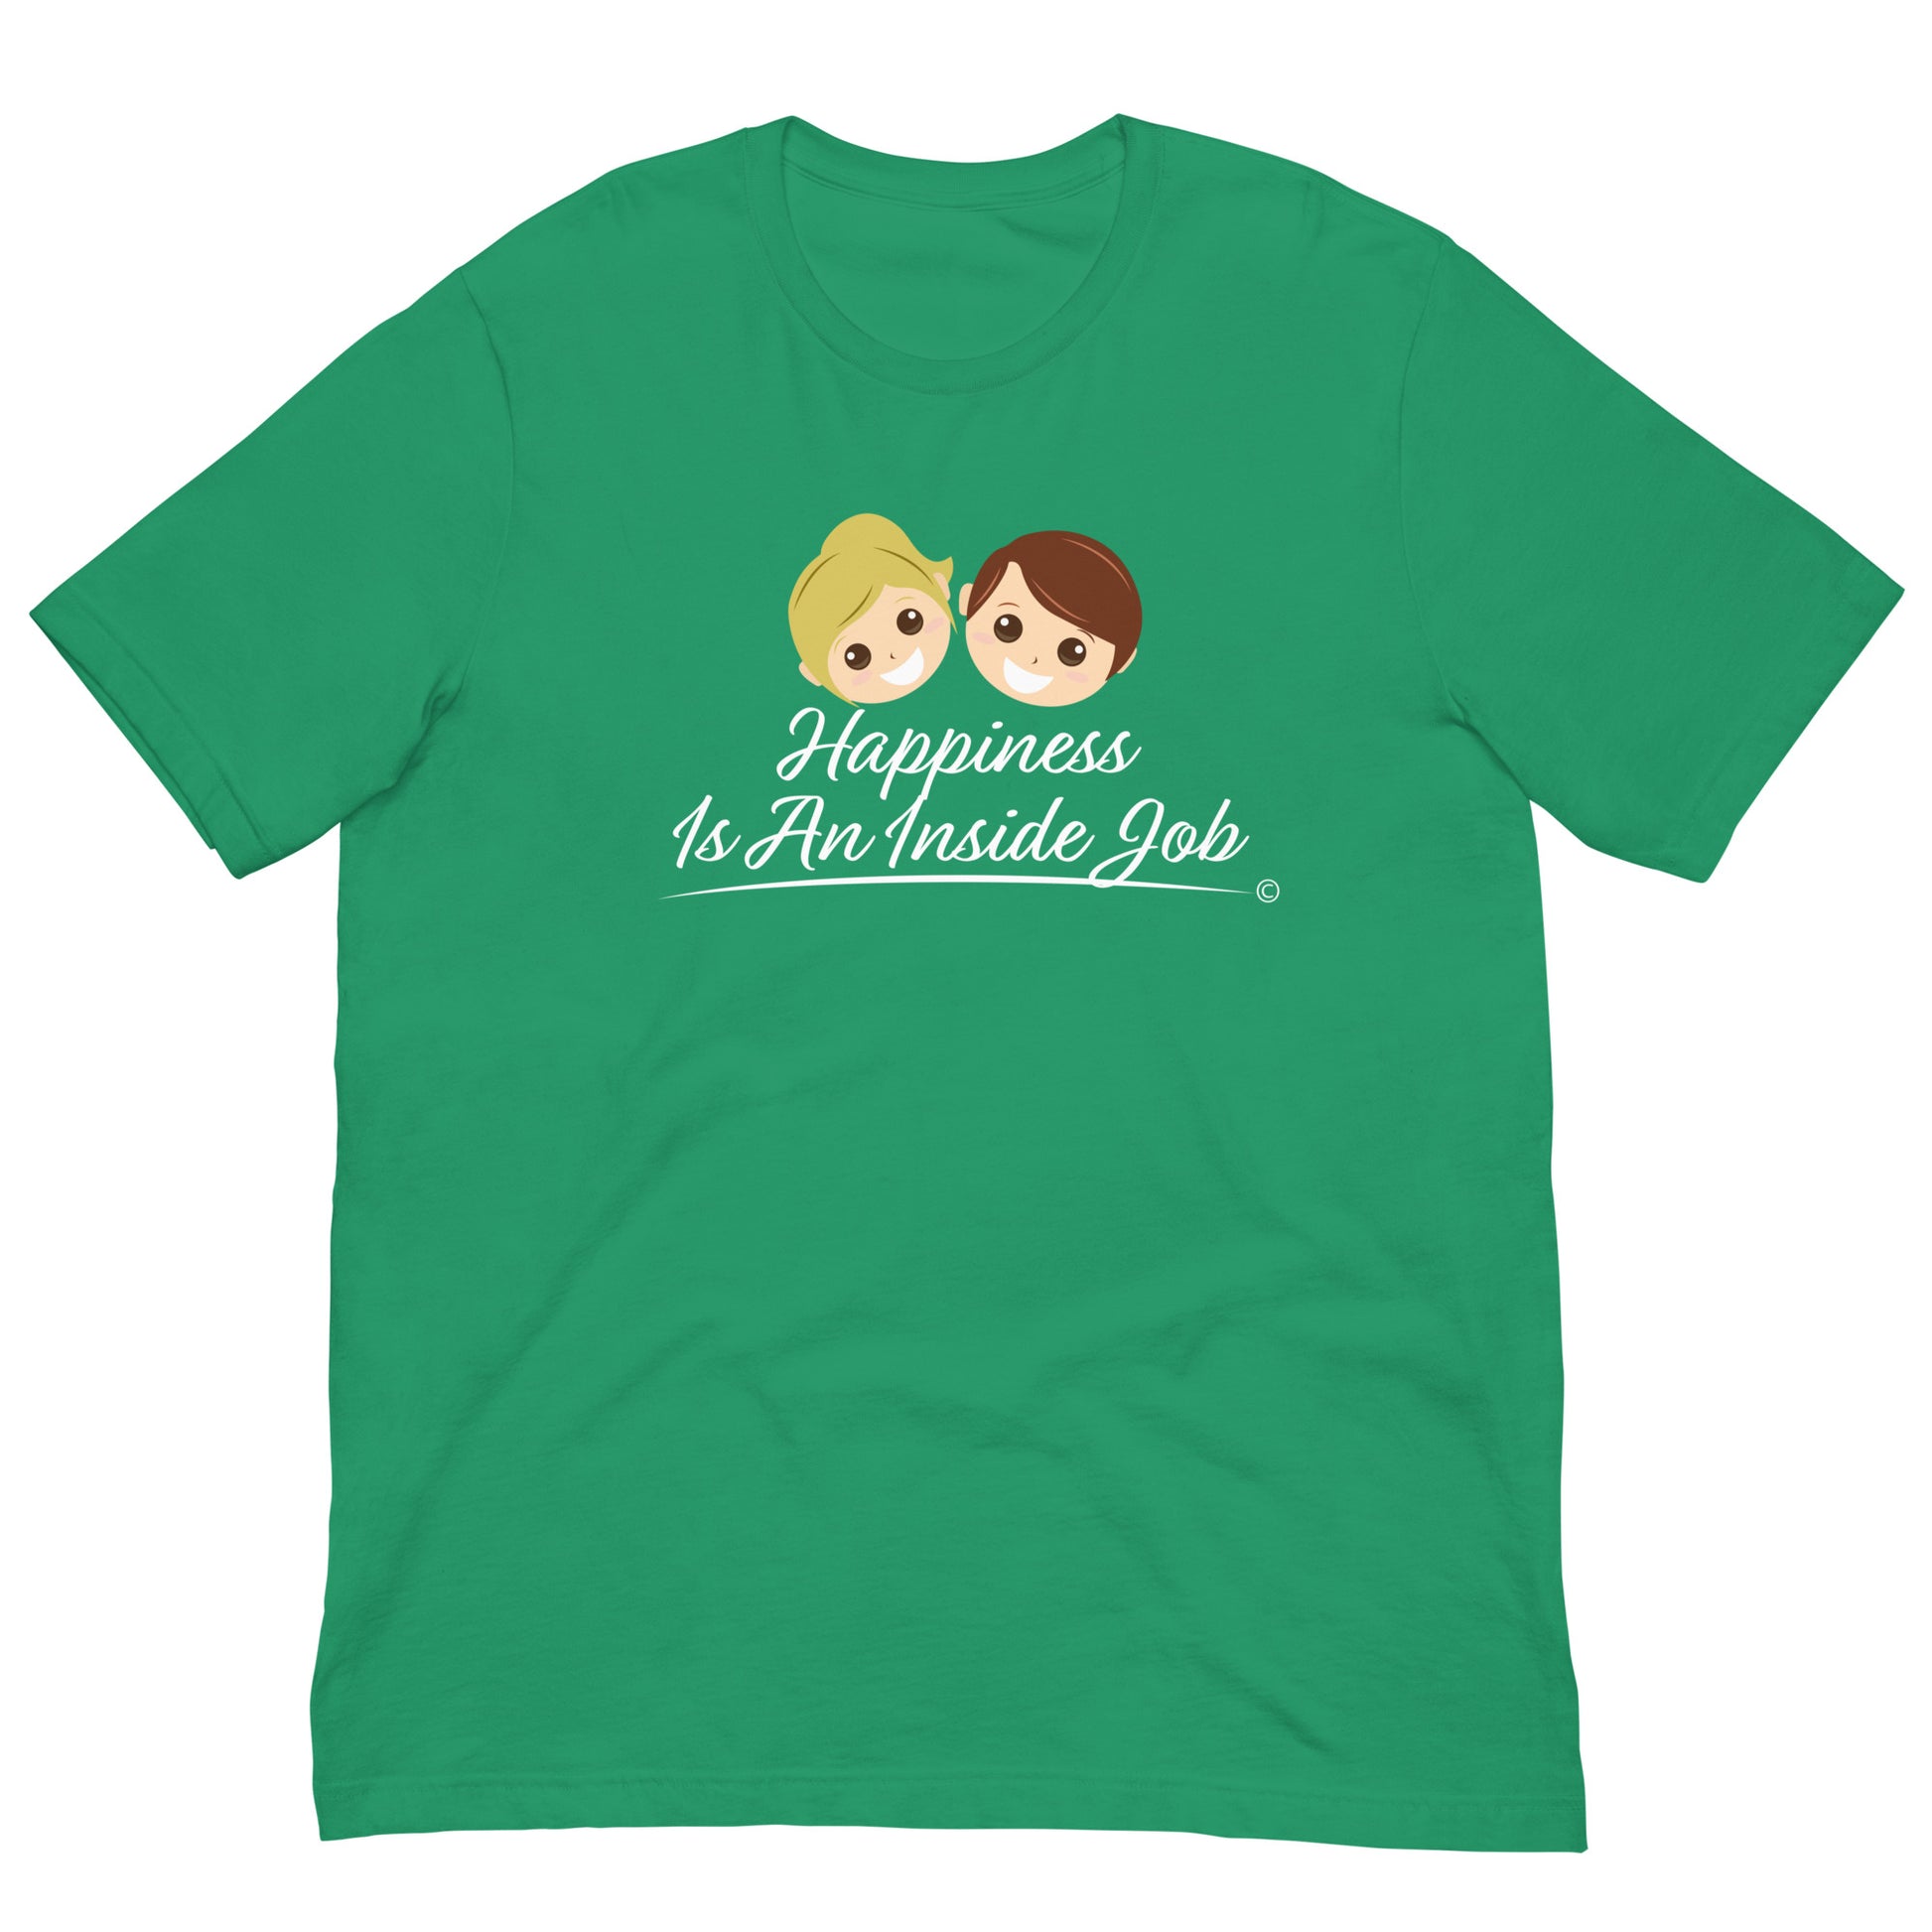 Short-sleeve shirt for adults -Kelly Green